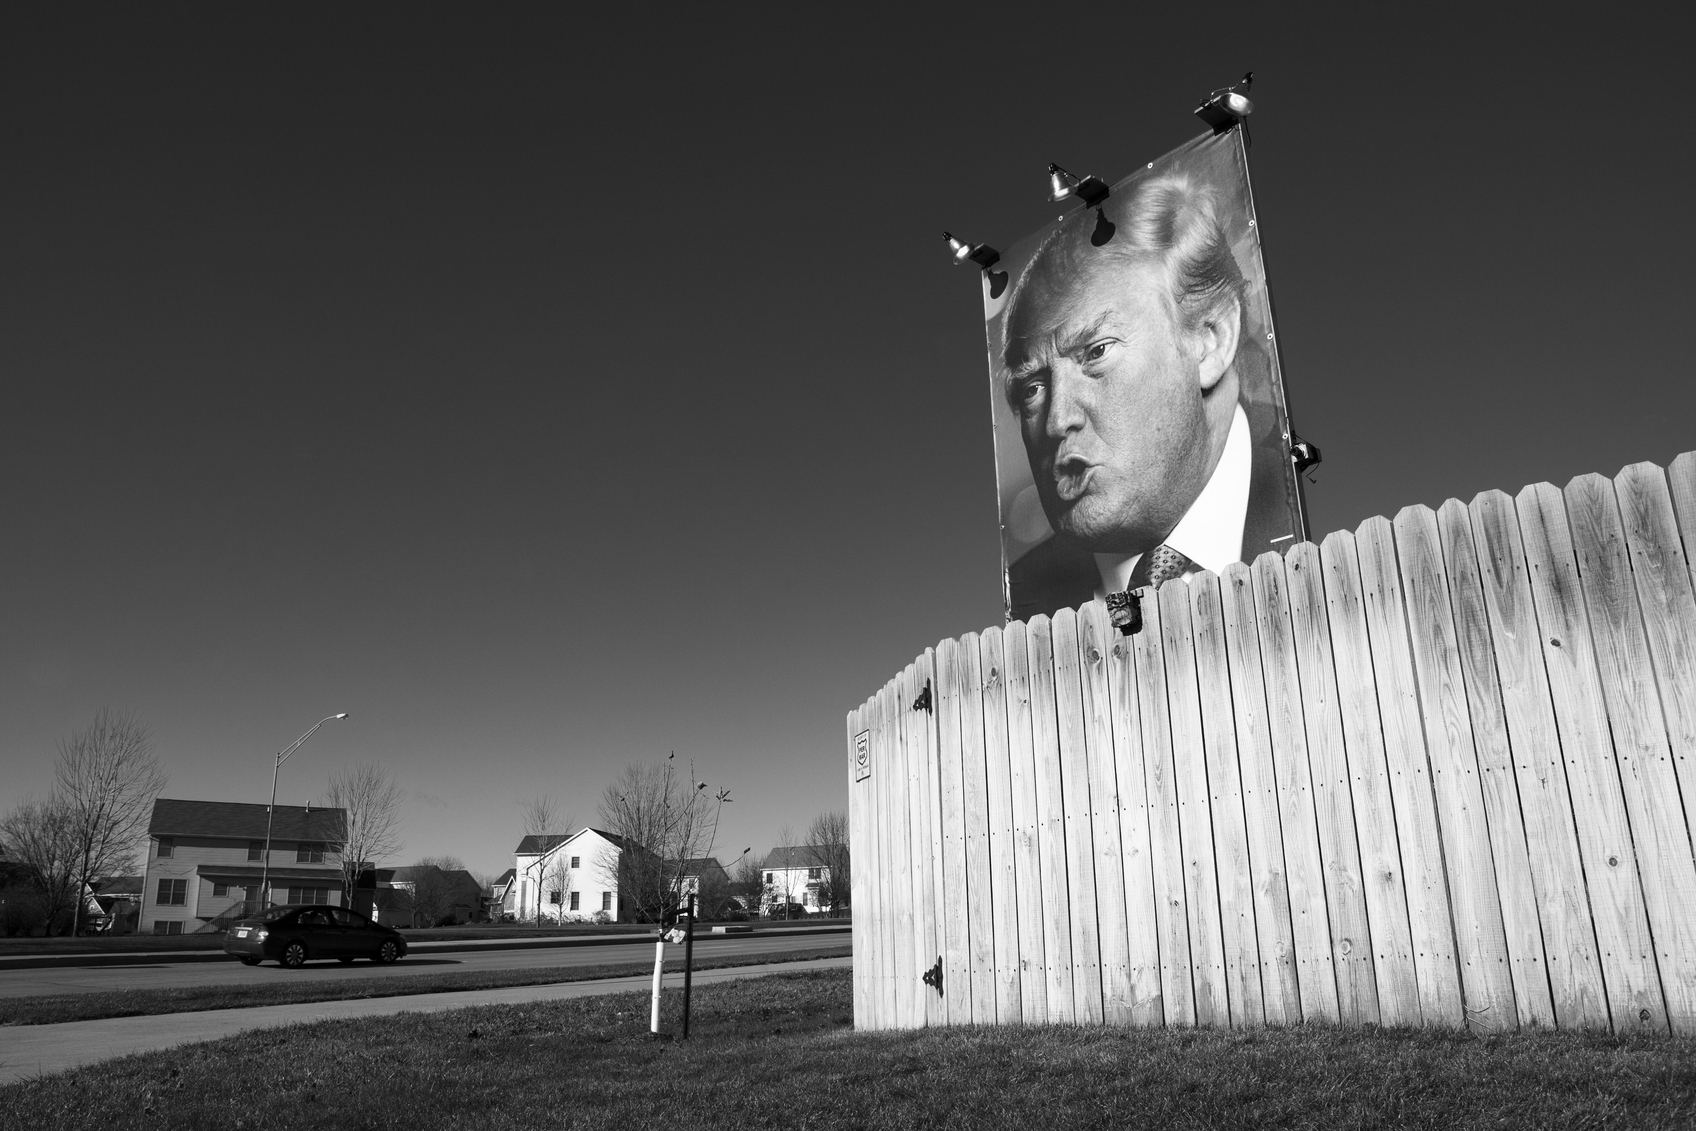 Des Moines, Iowa, United States – December 10, 2015: An ardent supporter of Donald Trump put up his own billboard at his home in West Des Moines, Iowa. December 10, 2015